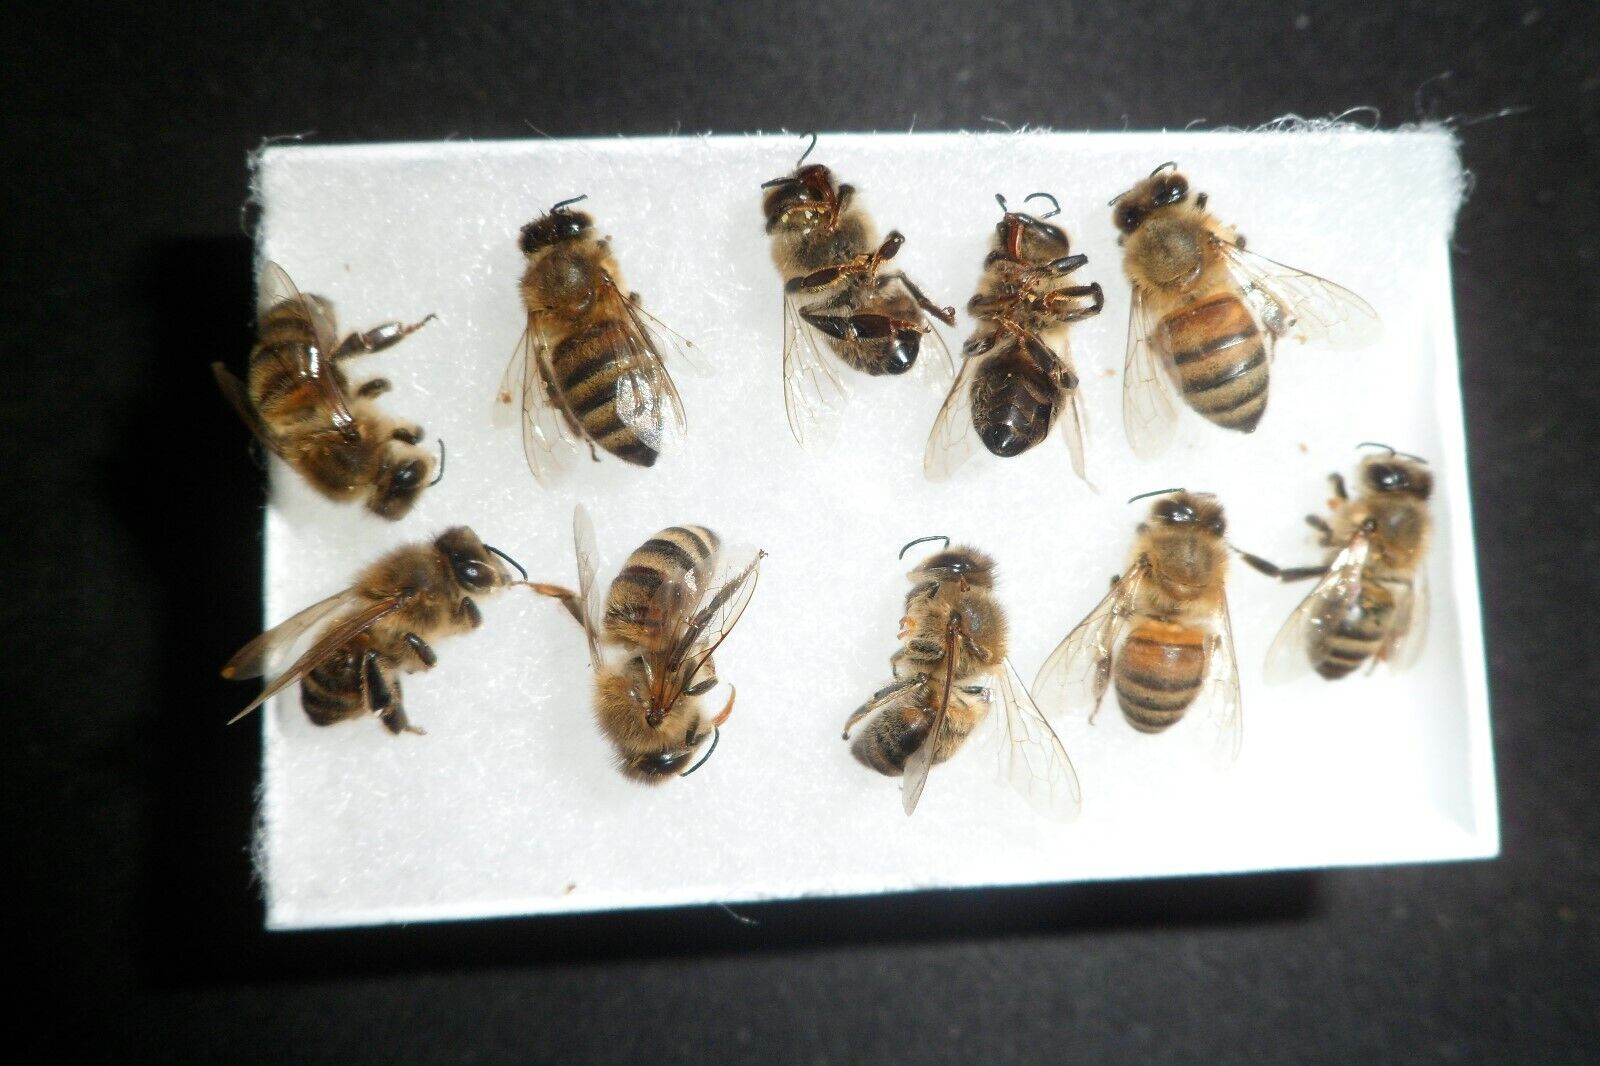 USA Bees FRESH 14 REAL Honeybee's DRYED SPECIMEN INSECT TAXIDERMY